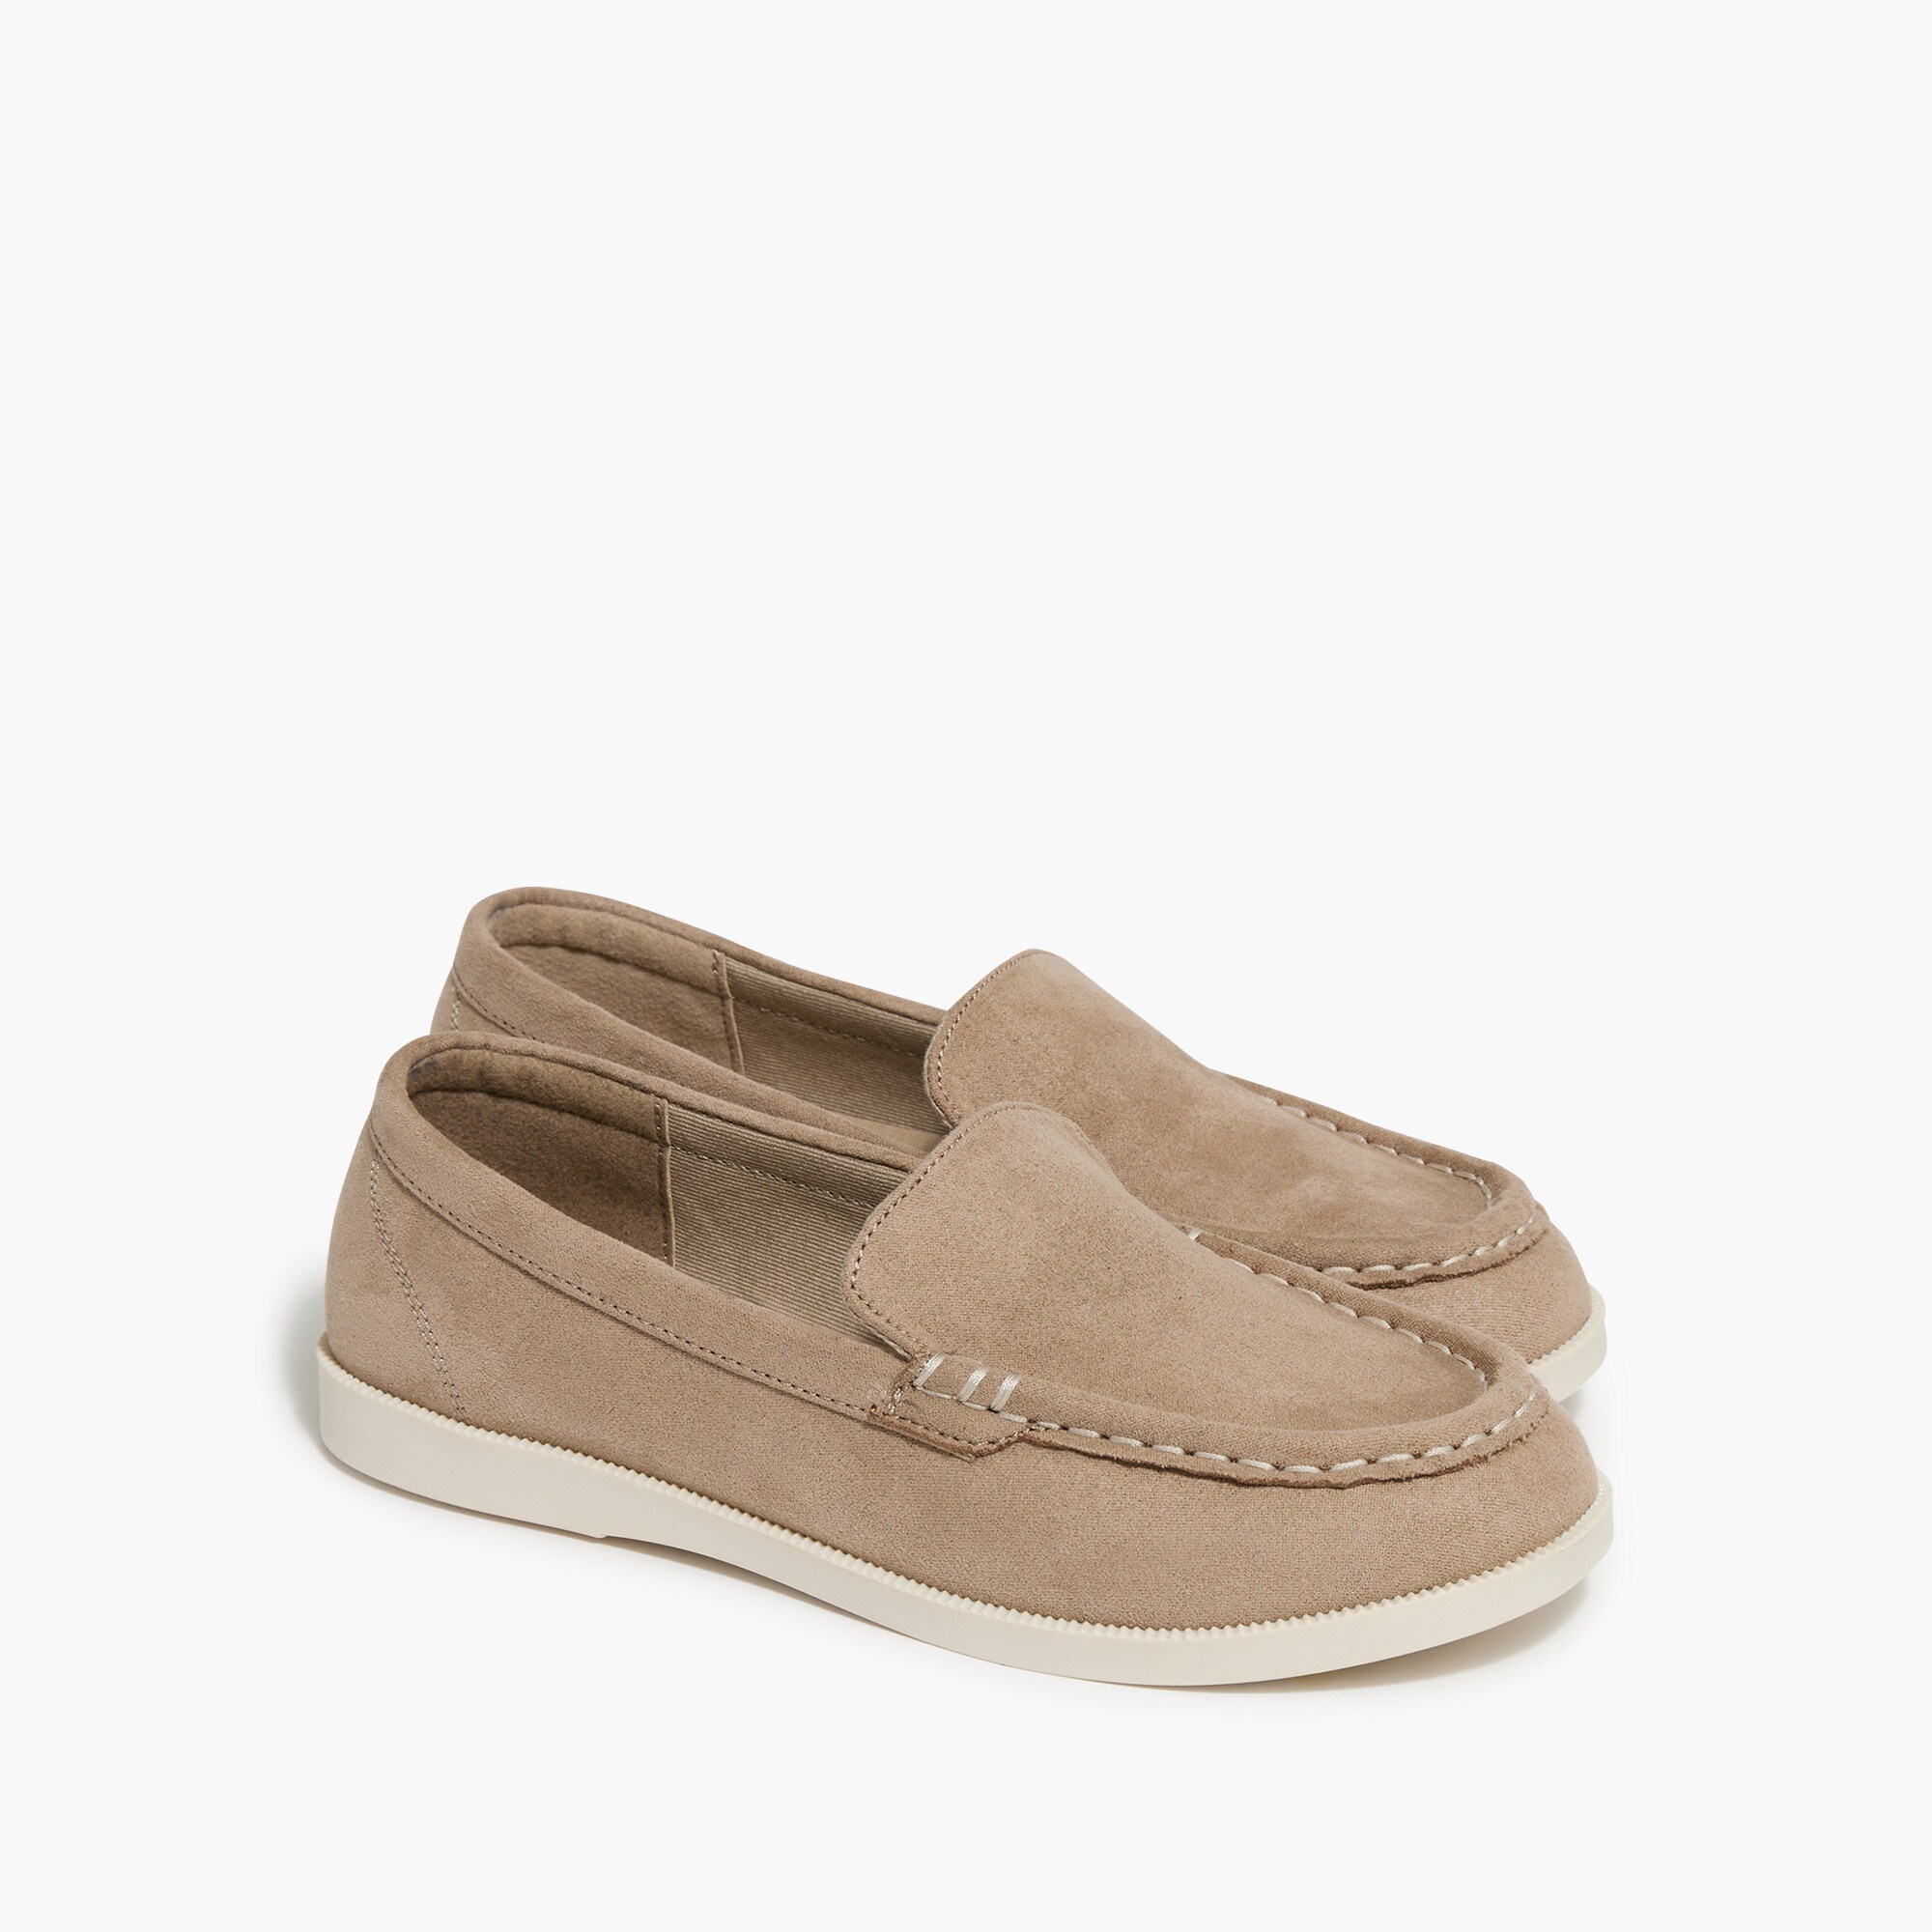 boys Boys' sueded loafers